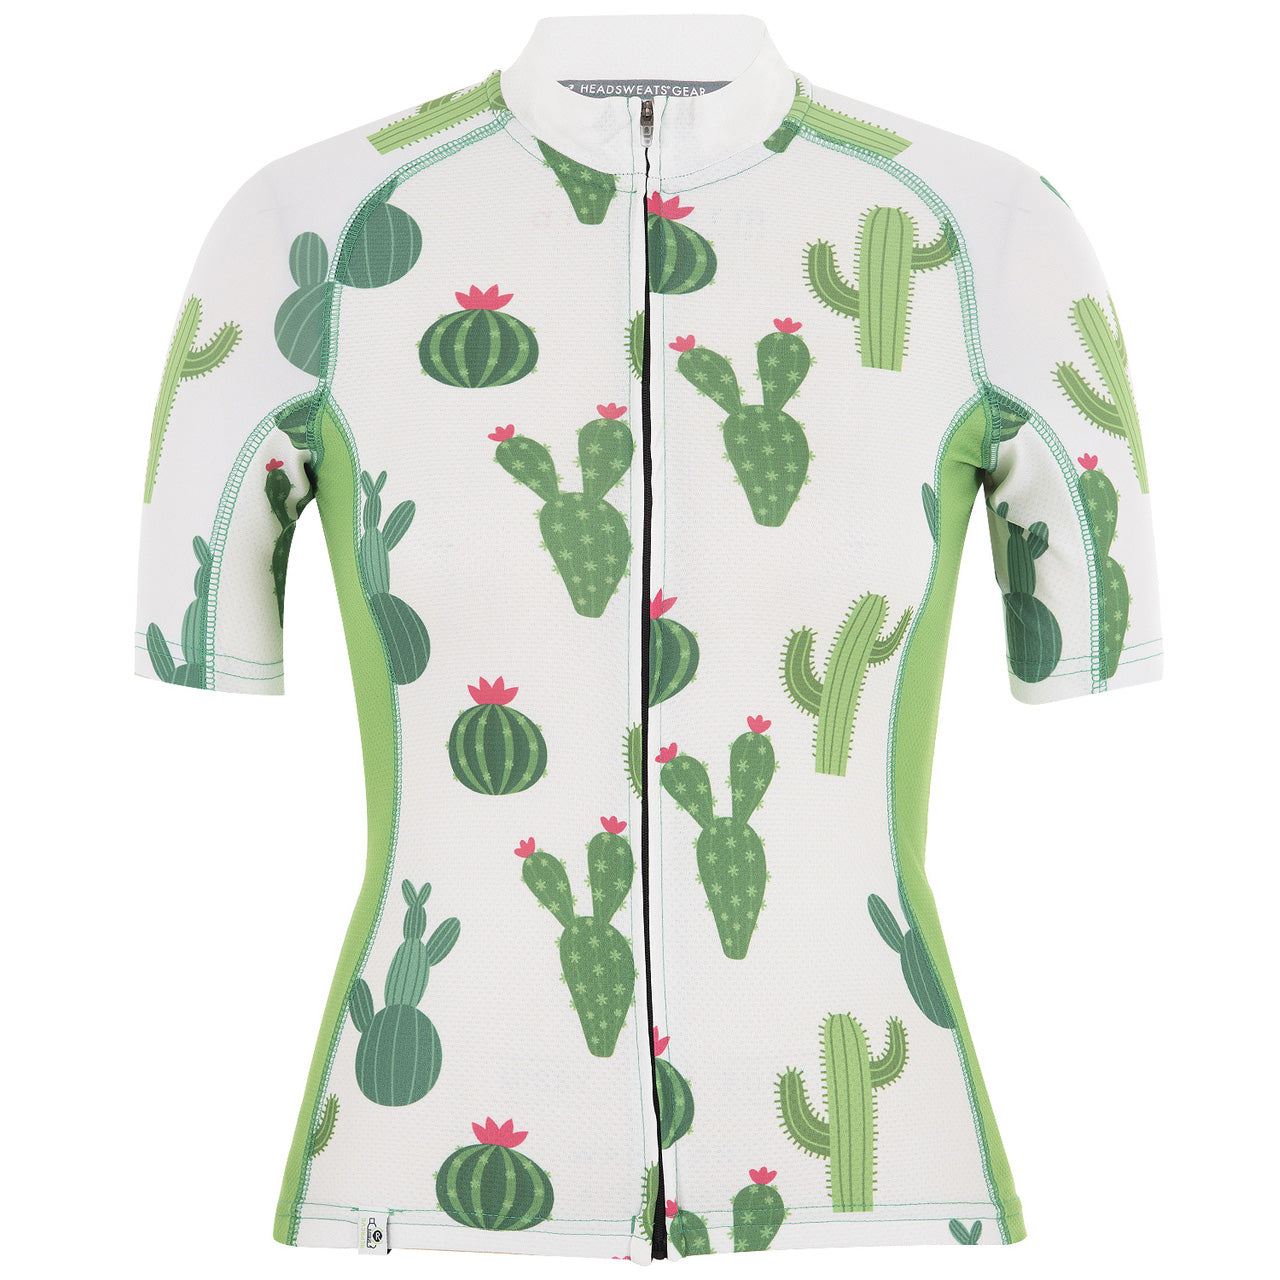 Womens_Cycling_Jersey_Cacti_Front__42834.1615484728.1280.1280.jpg